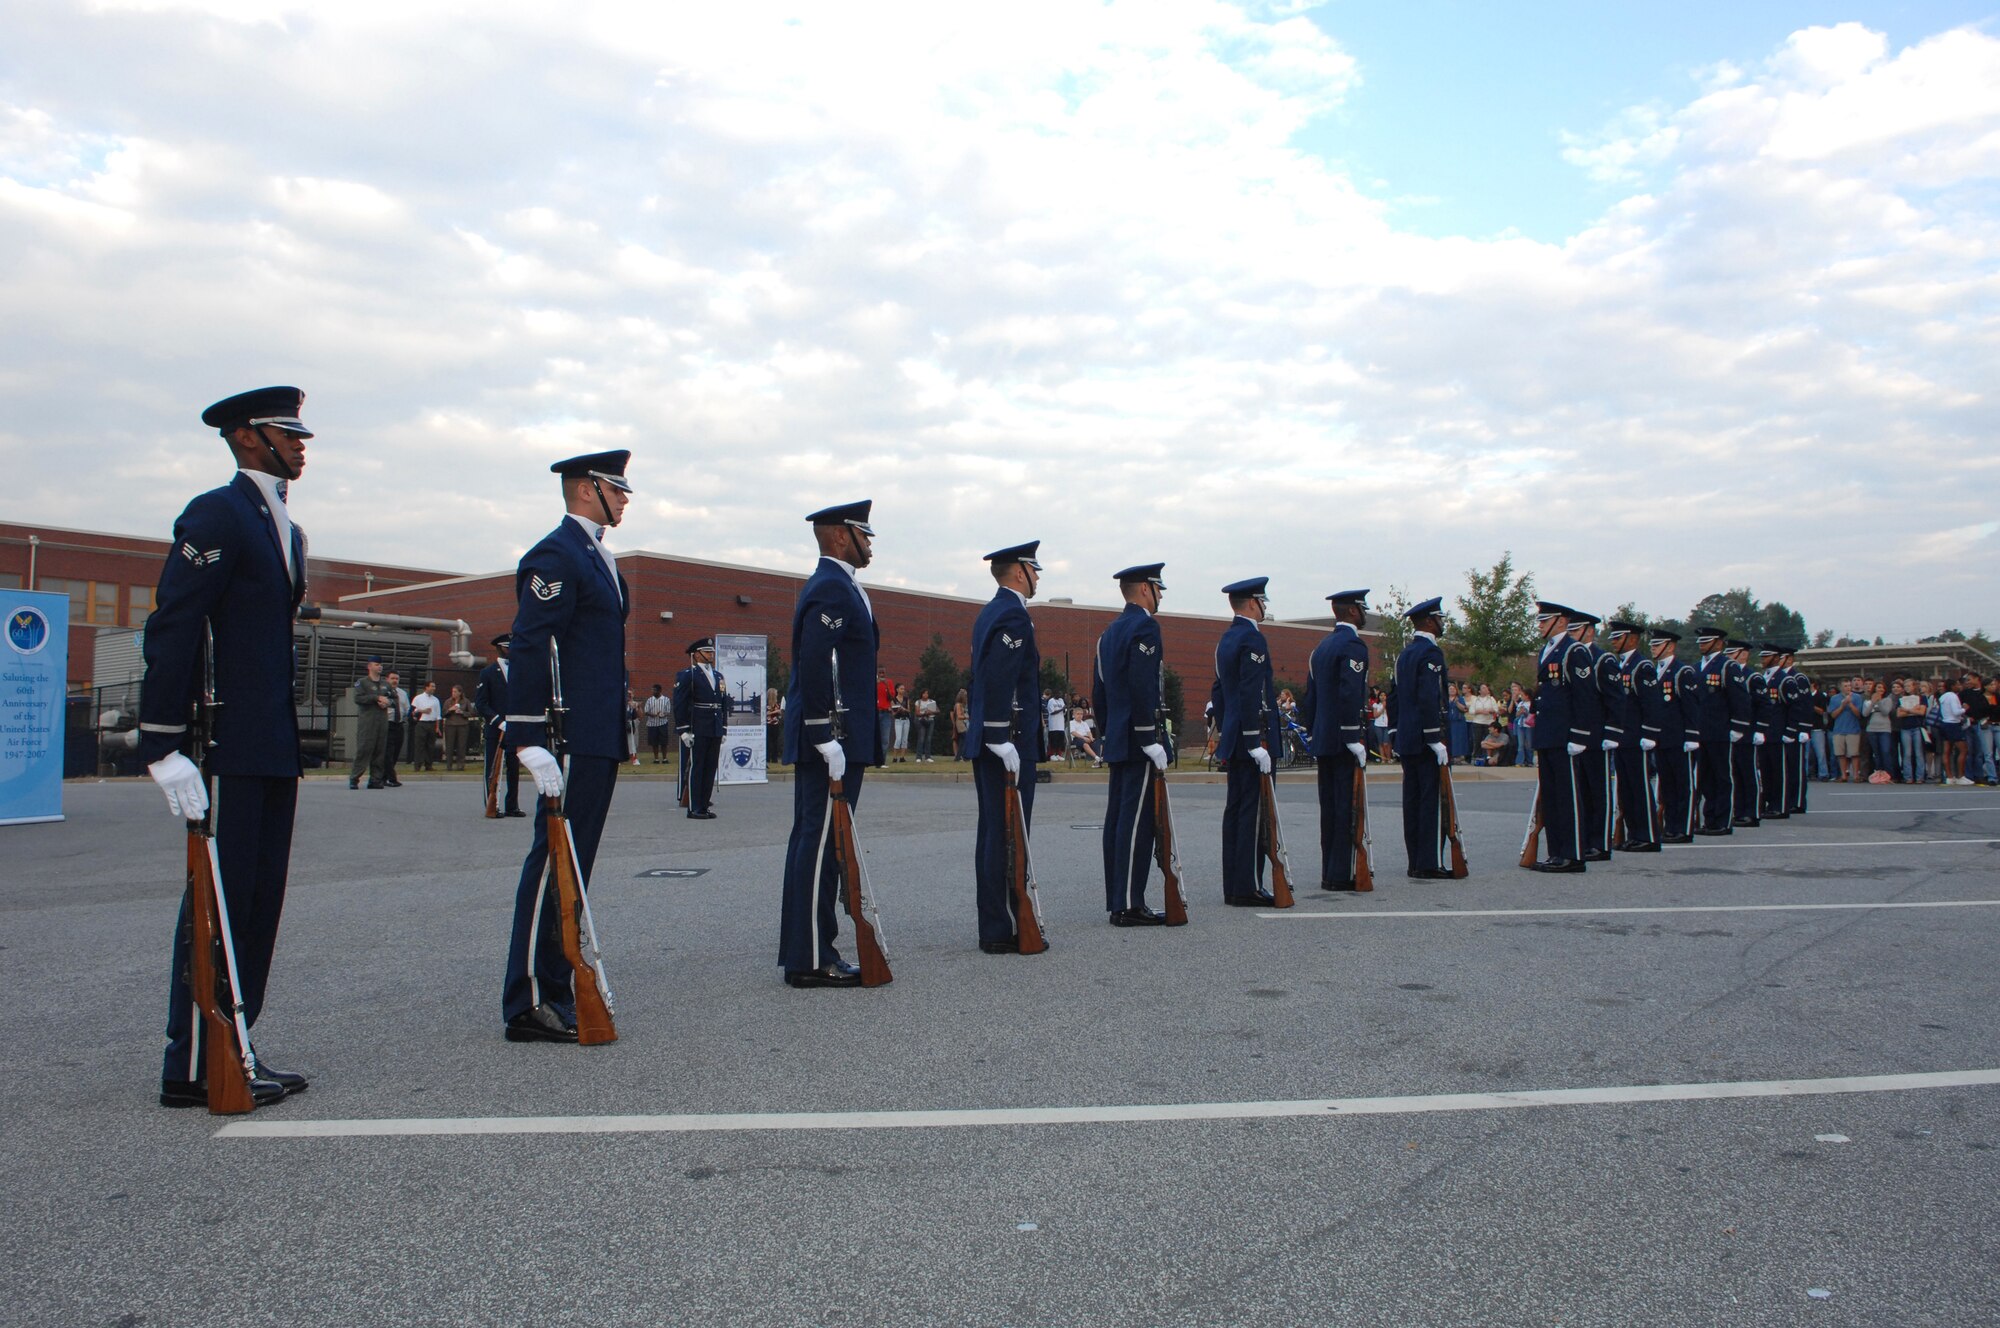 Members of the Air Force Honor Guard Drill Team perform at Marietta High School in Marietta, Ga. on October 9, 2007. The drill team visited several area high schools, with other Air Force demo teams, as part of Air Force Week Atlanta events leading up to the Great Georgia Air Show in Peachtree City, Ga., and promoted the AF mission by showcasing drill performances at public and military venues to recruit, retain, and inspire Airmen. ( U.S. Air Force photo/Airman First Class Tim Chacon)(Released)